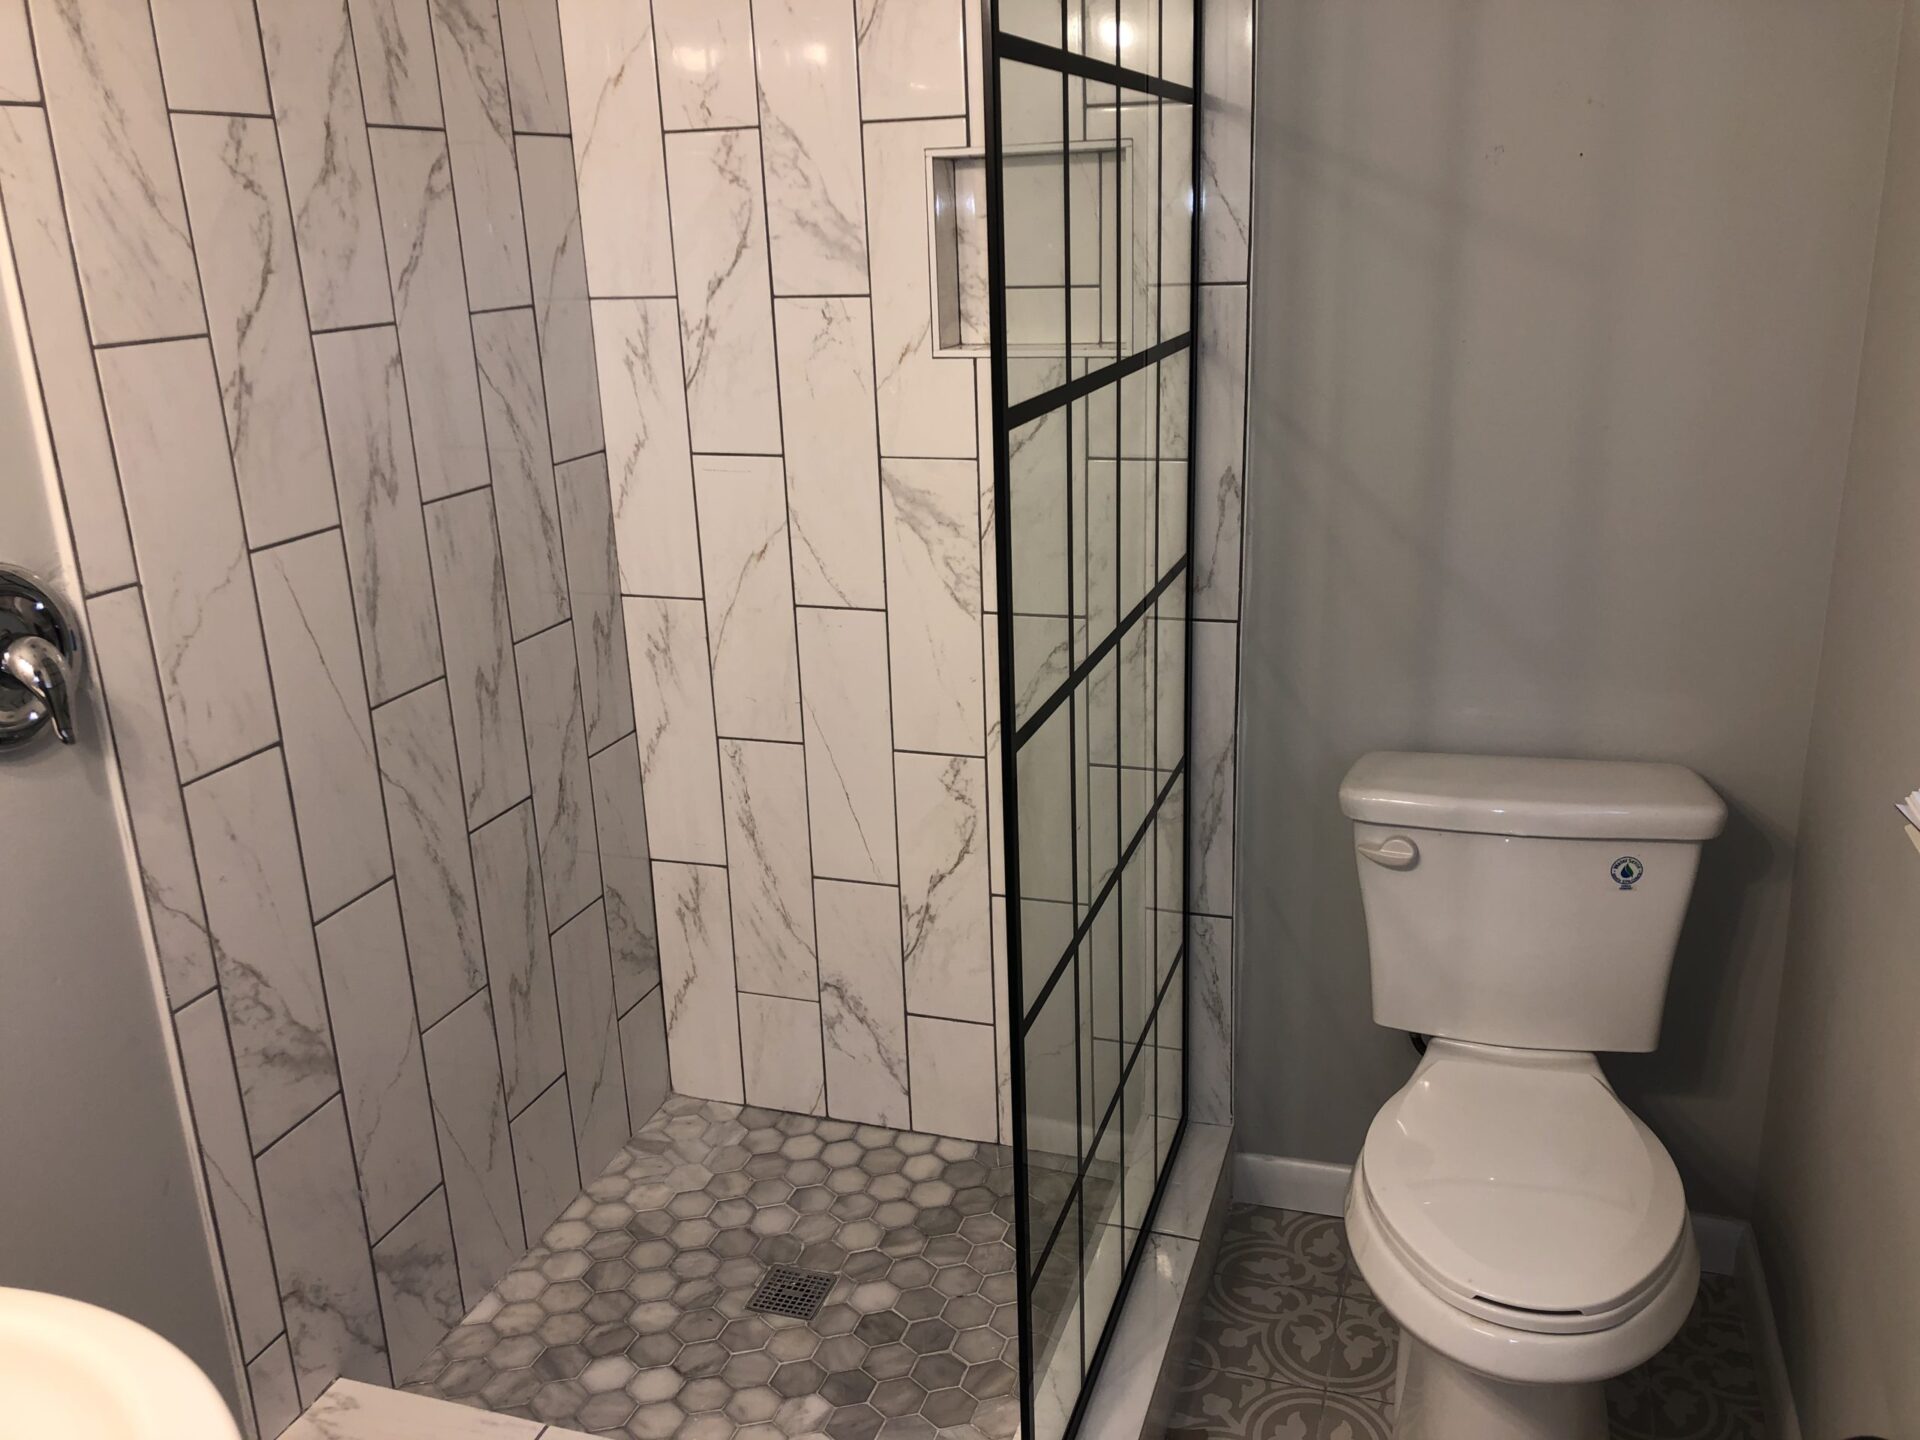 A shower booth and a toilet seat next to it